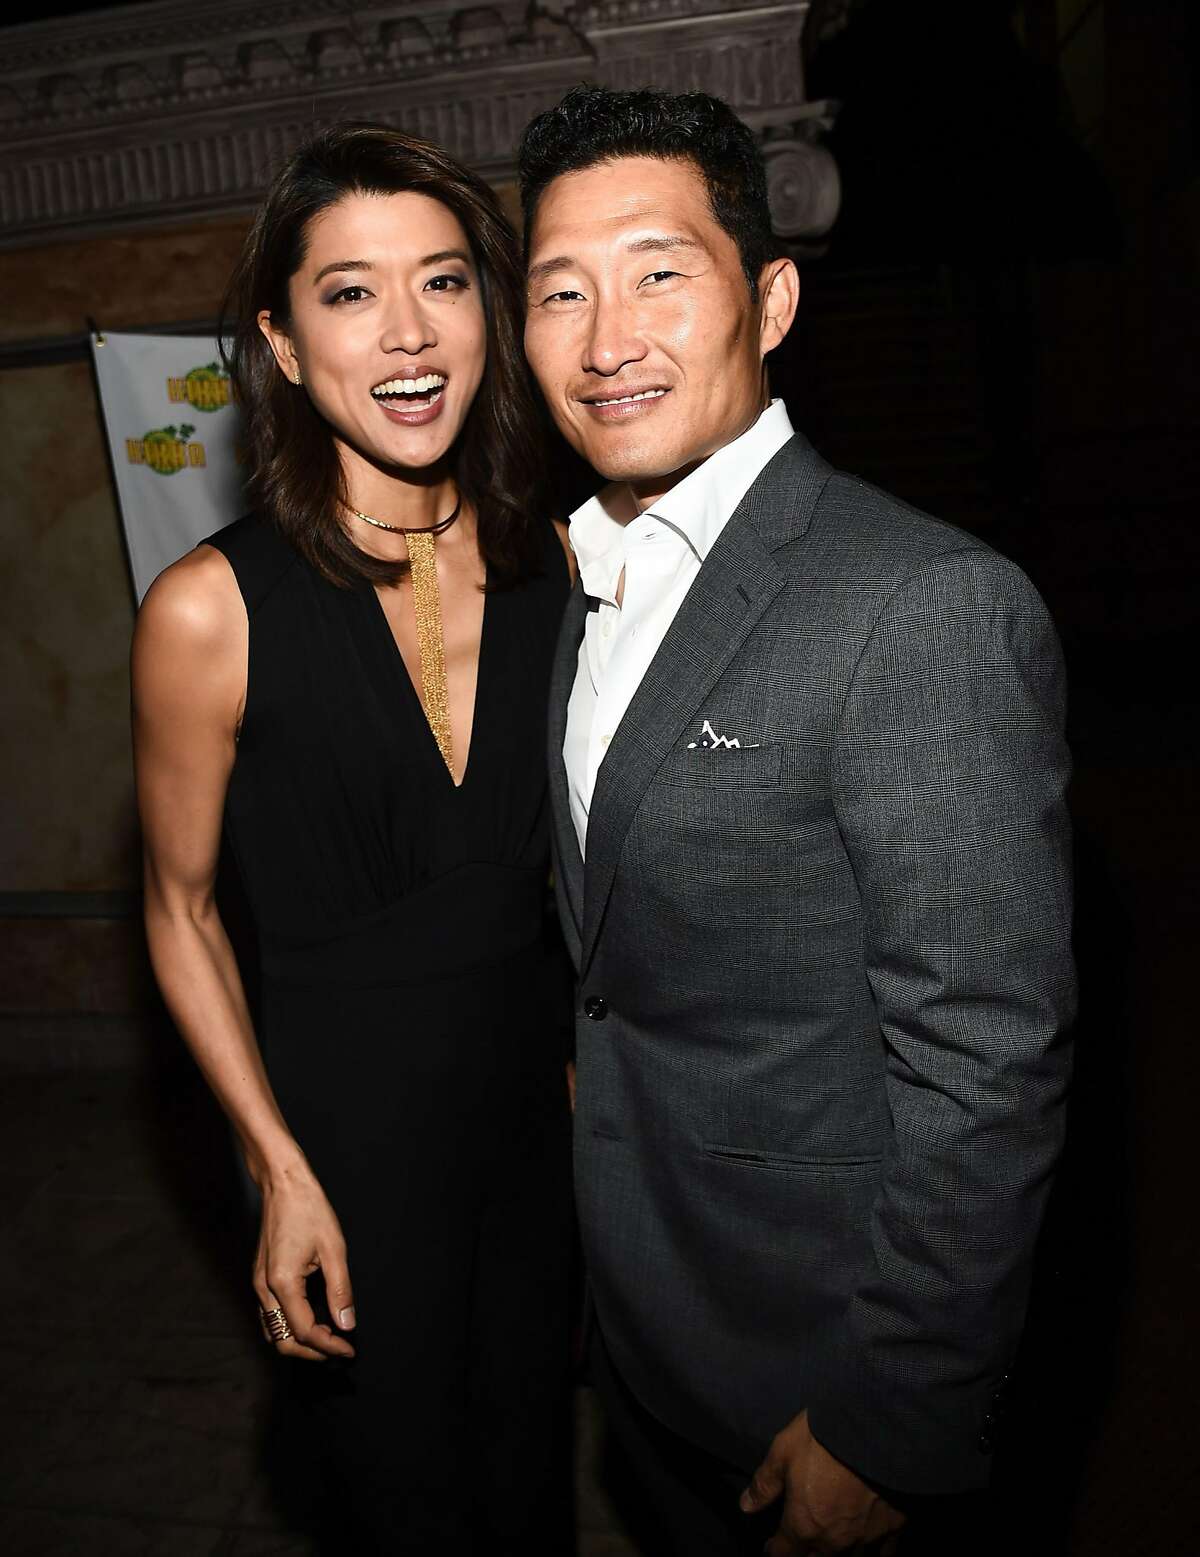 Grace Park and Daniel Dae Kim at the Coalition of Asian Pacifics in Entertainment 25th Anniversary Gala on Oct. 22, 2016 in Los Angeles, Calif. (Buckner/Rex Shutterstock/Zuma Press/TNS)